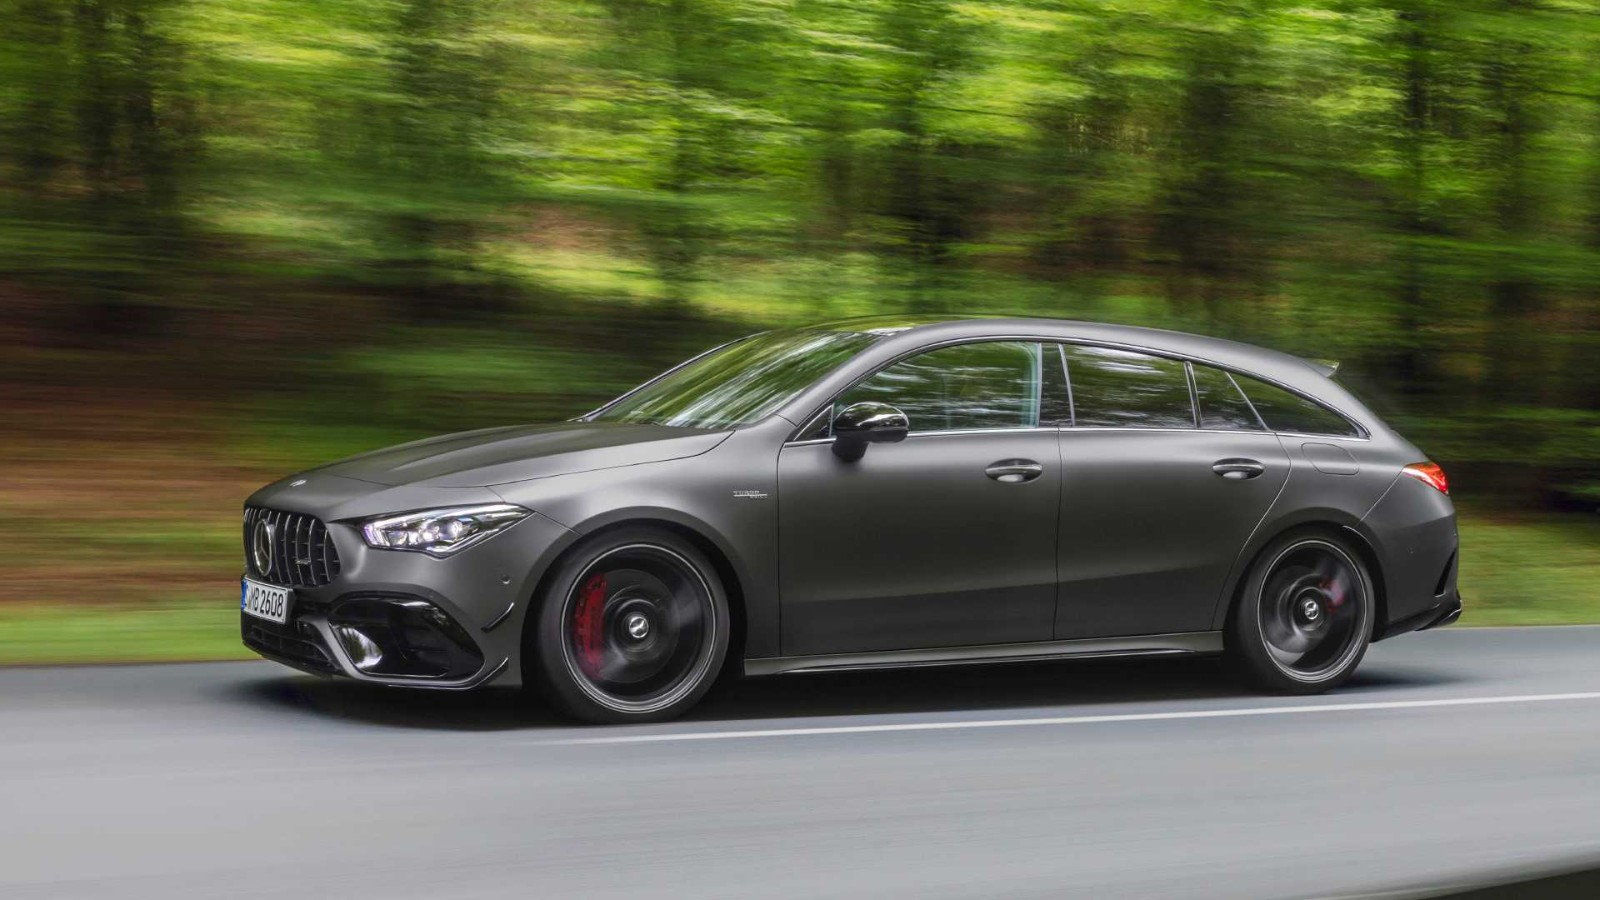 Mercedes Amg Cla 45 Shooting Brake Is A Powerful Compact Wagon Mbworld